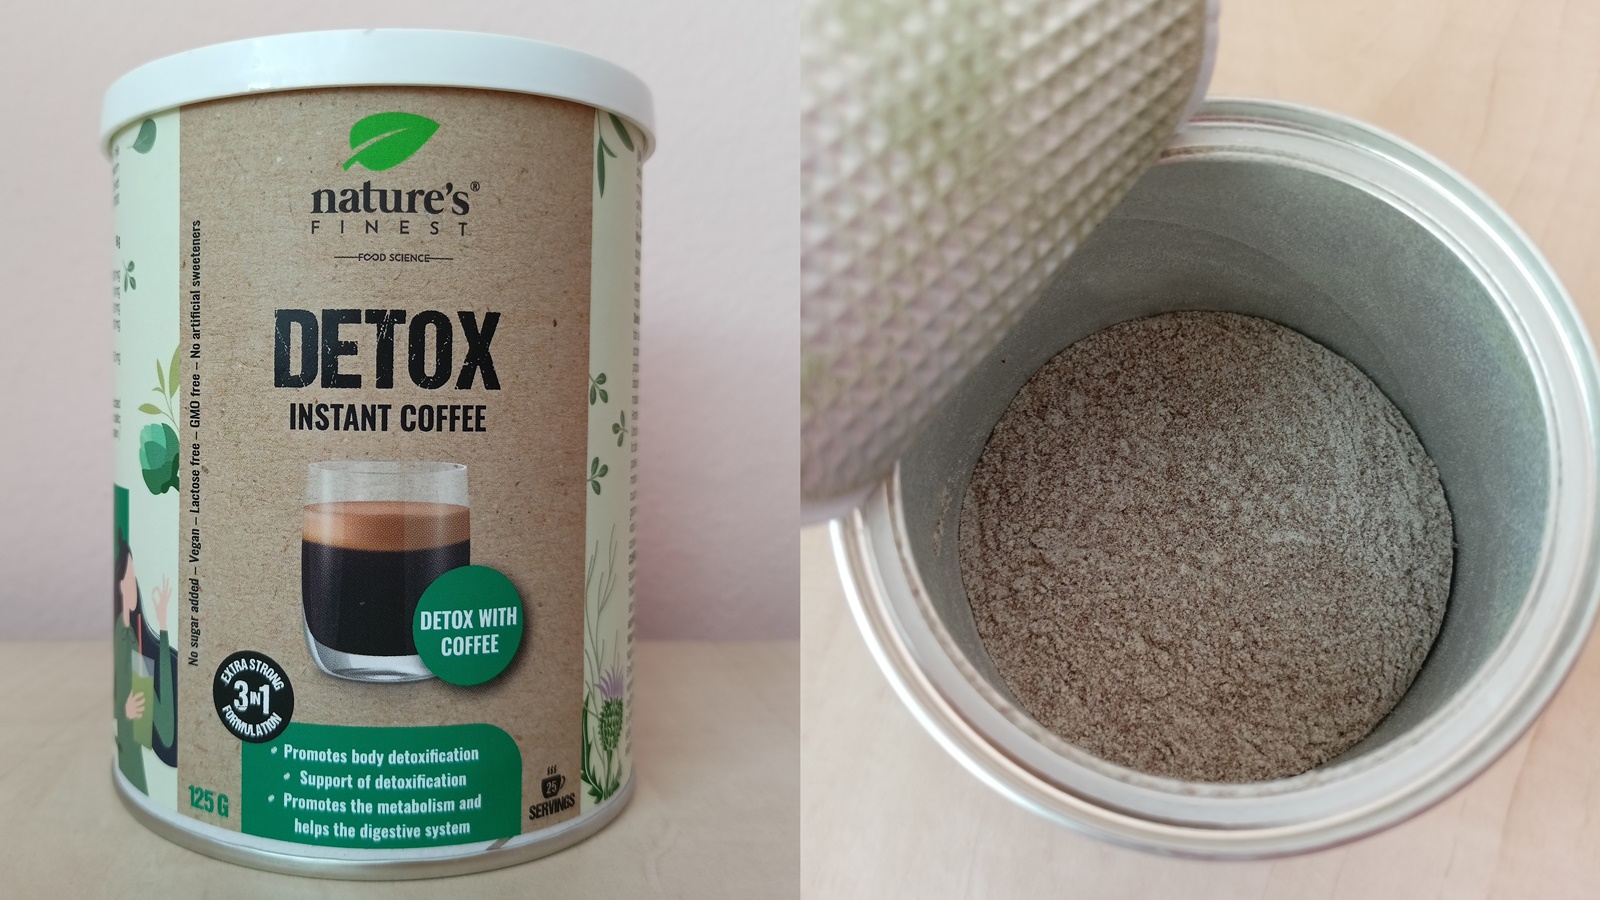 Recenze: Detox Instant Coffee od Nature’s Finest